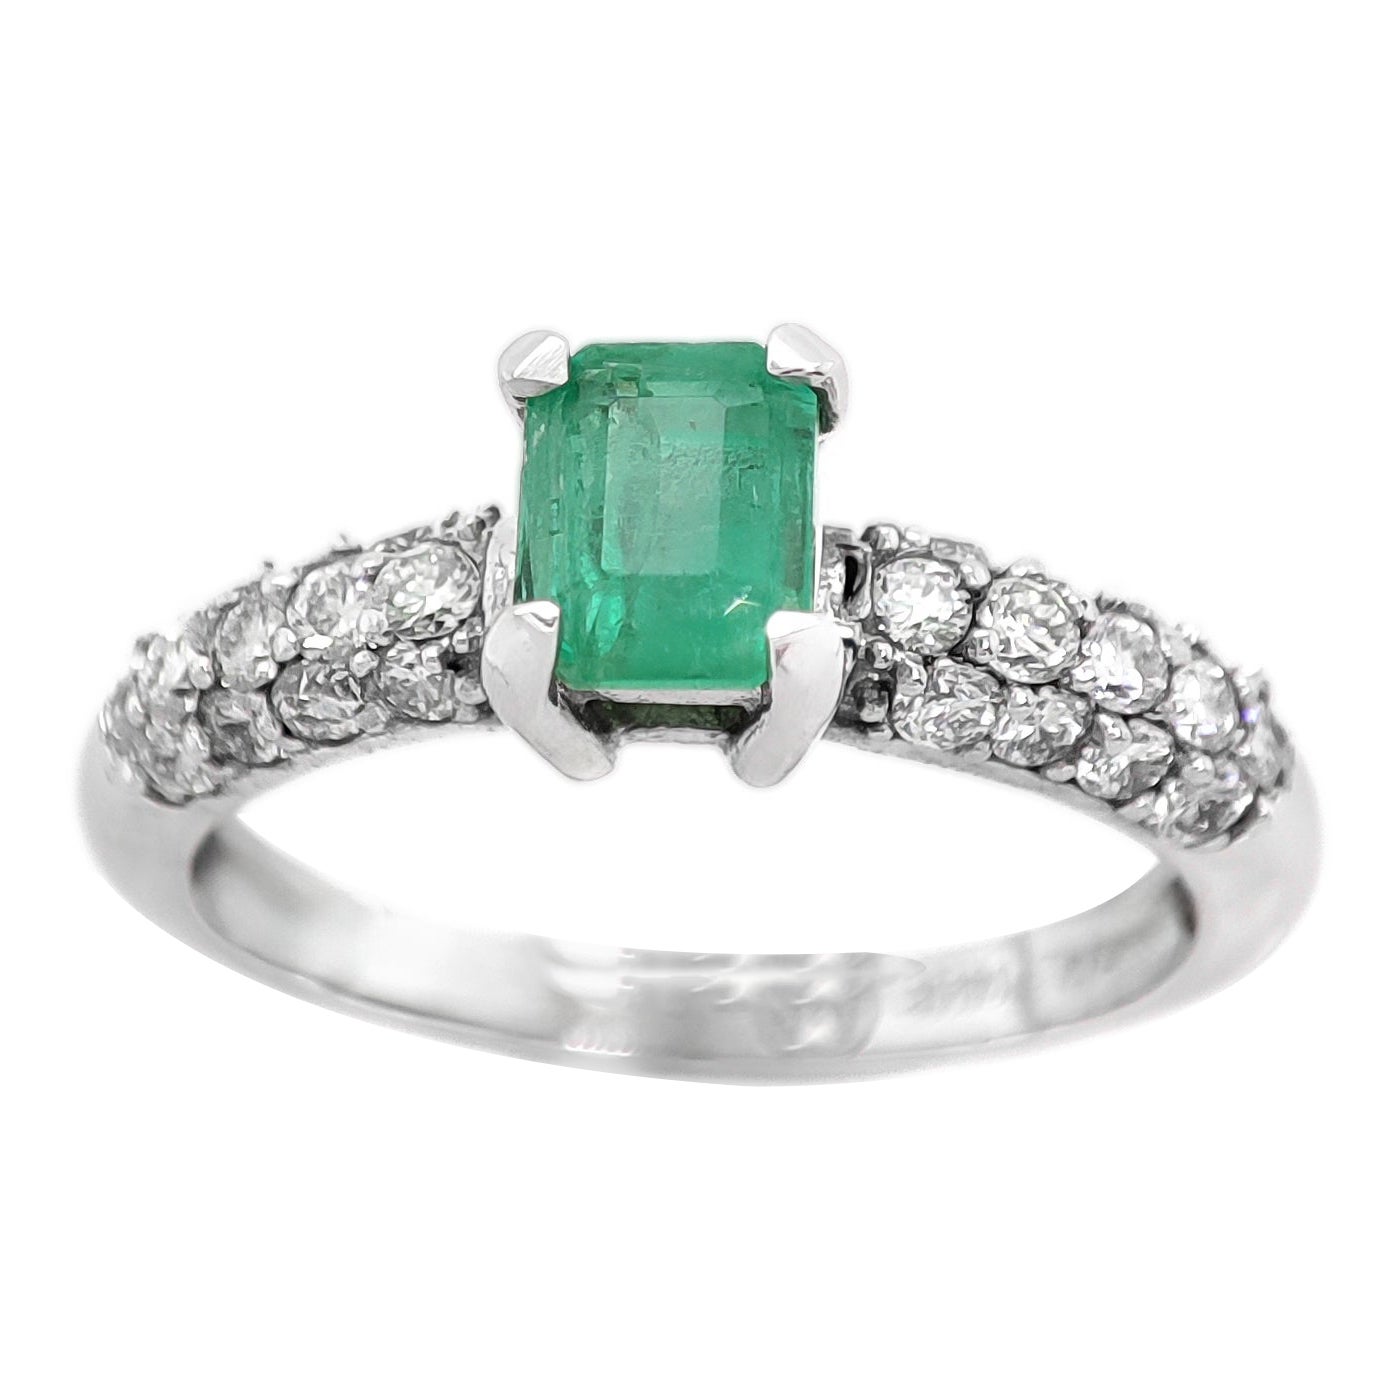 NO RESERVE 0.78CTW  Emerald and Diamond 14K white Gold Ring